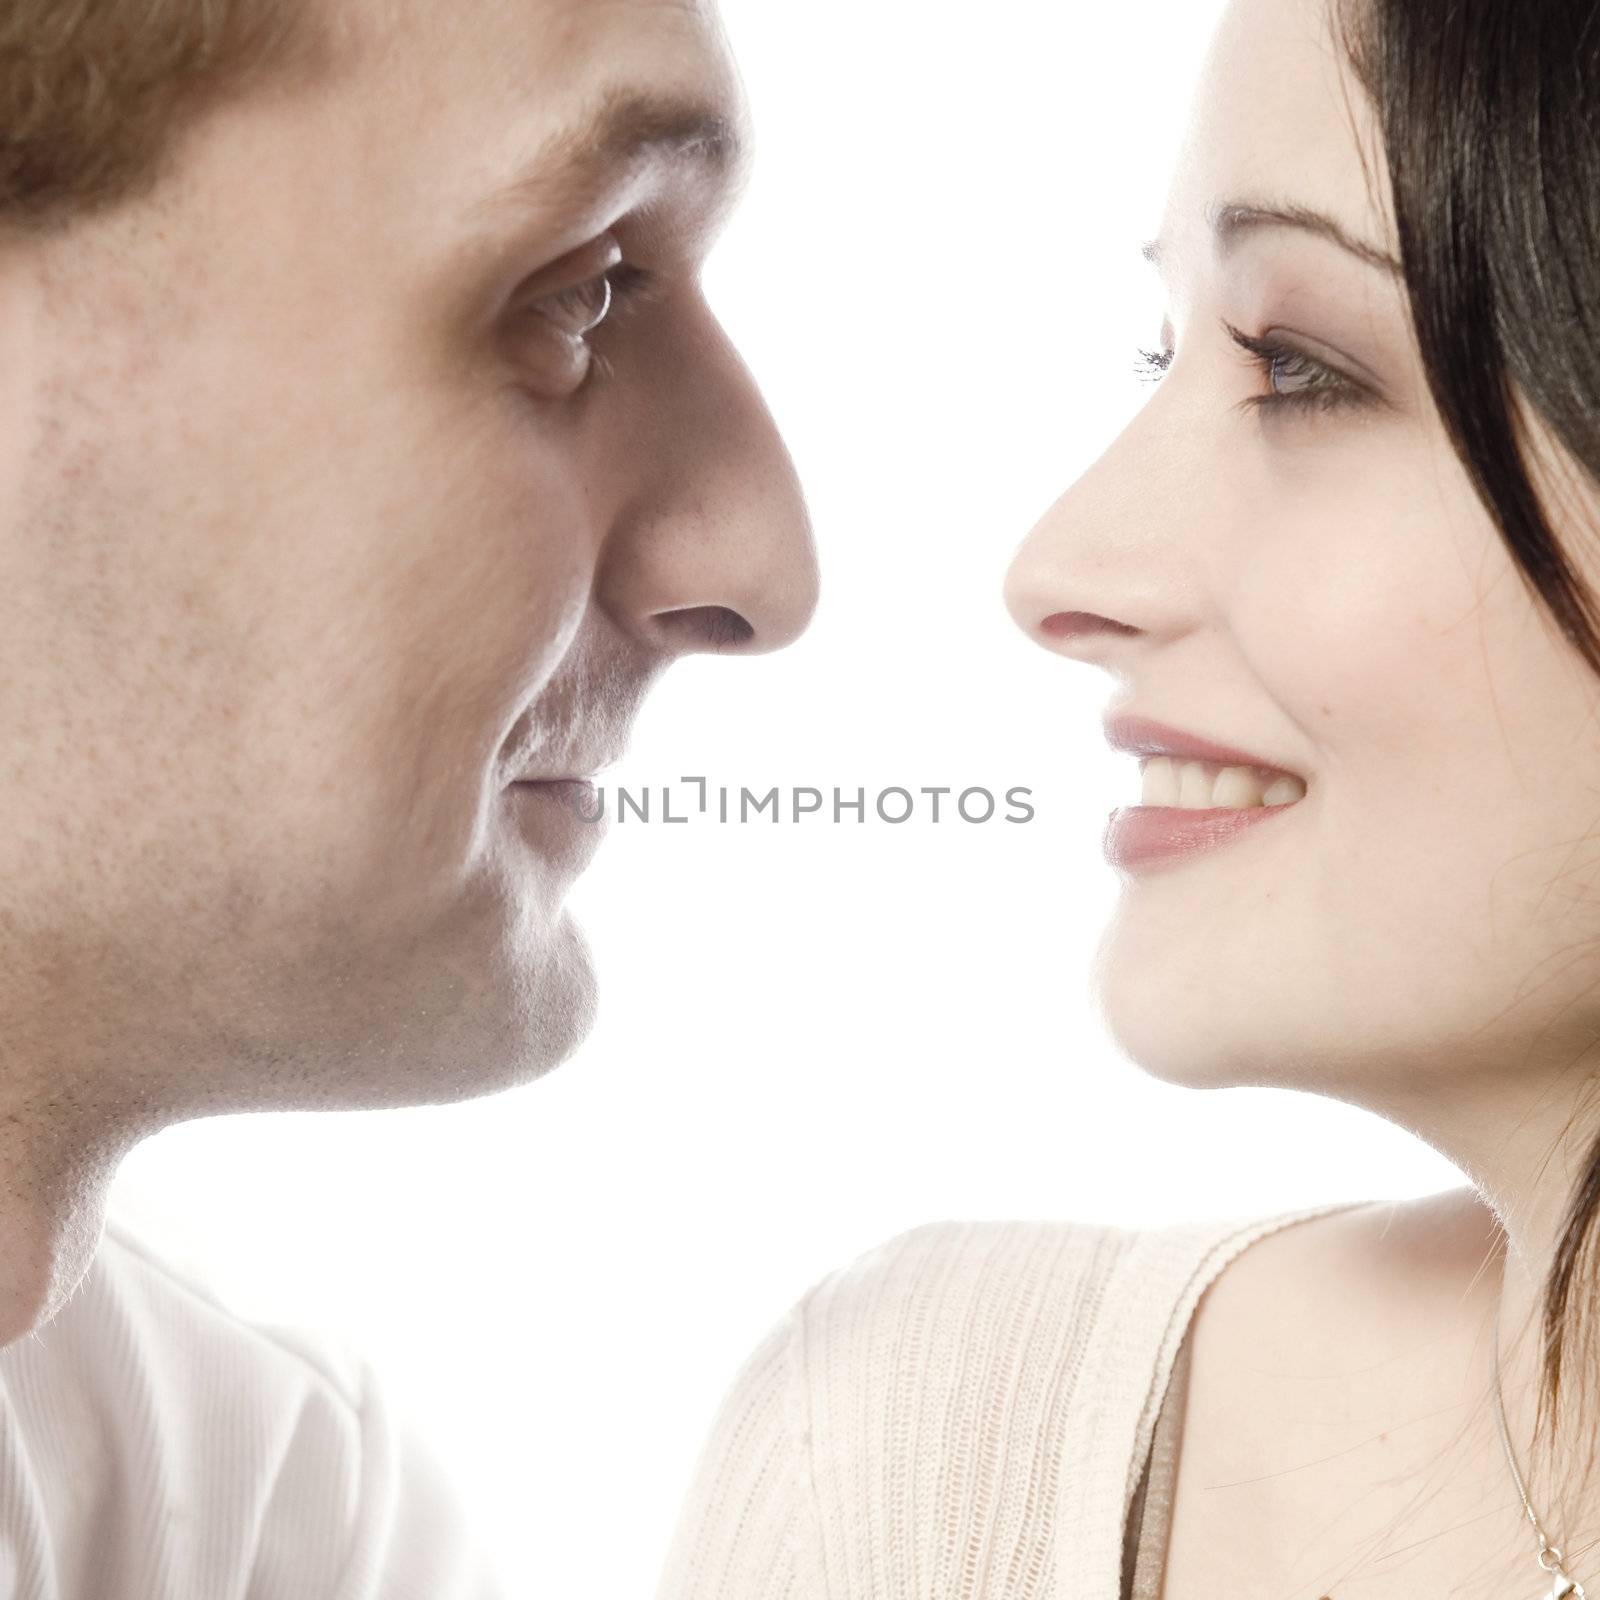 Studio portrait of a young couple looking at each other